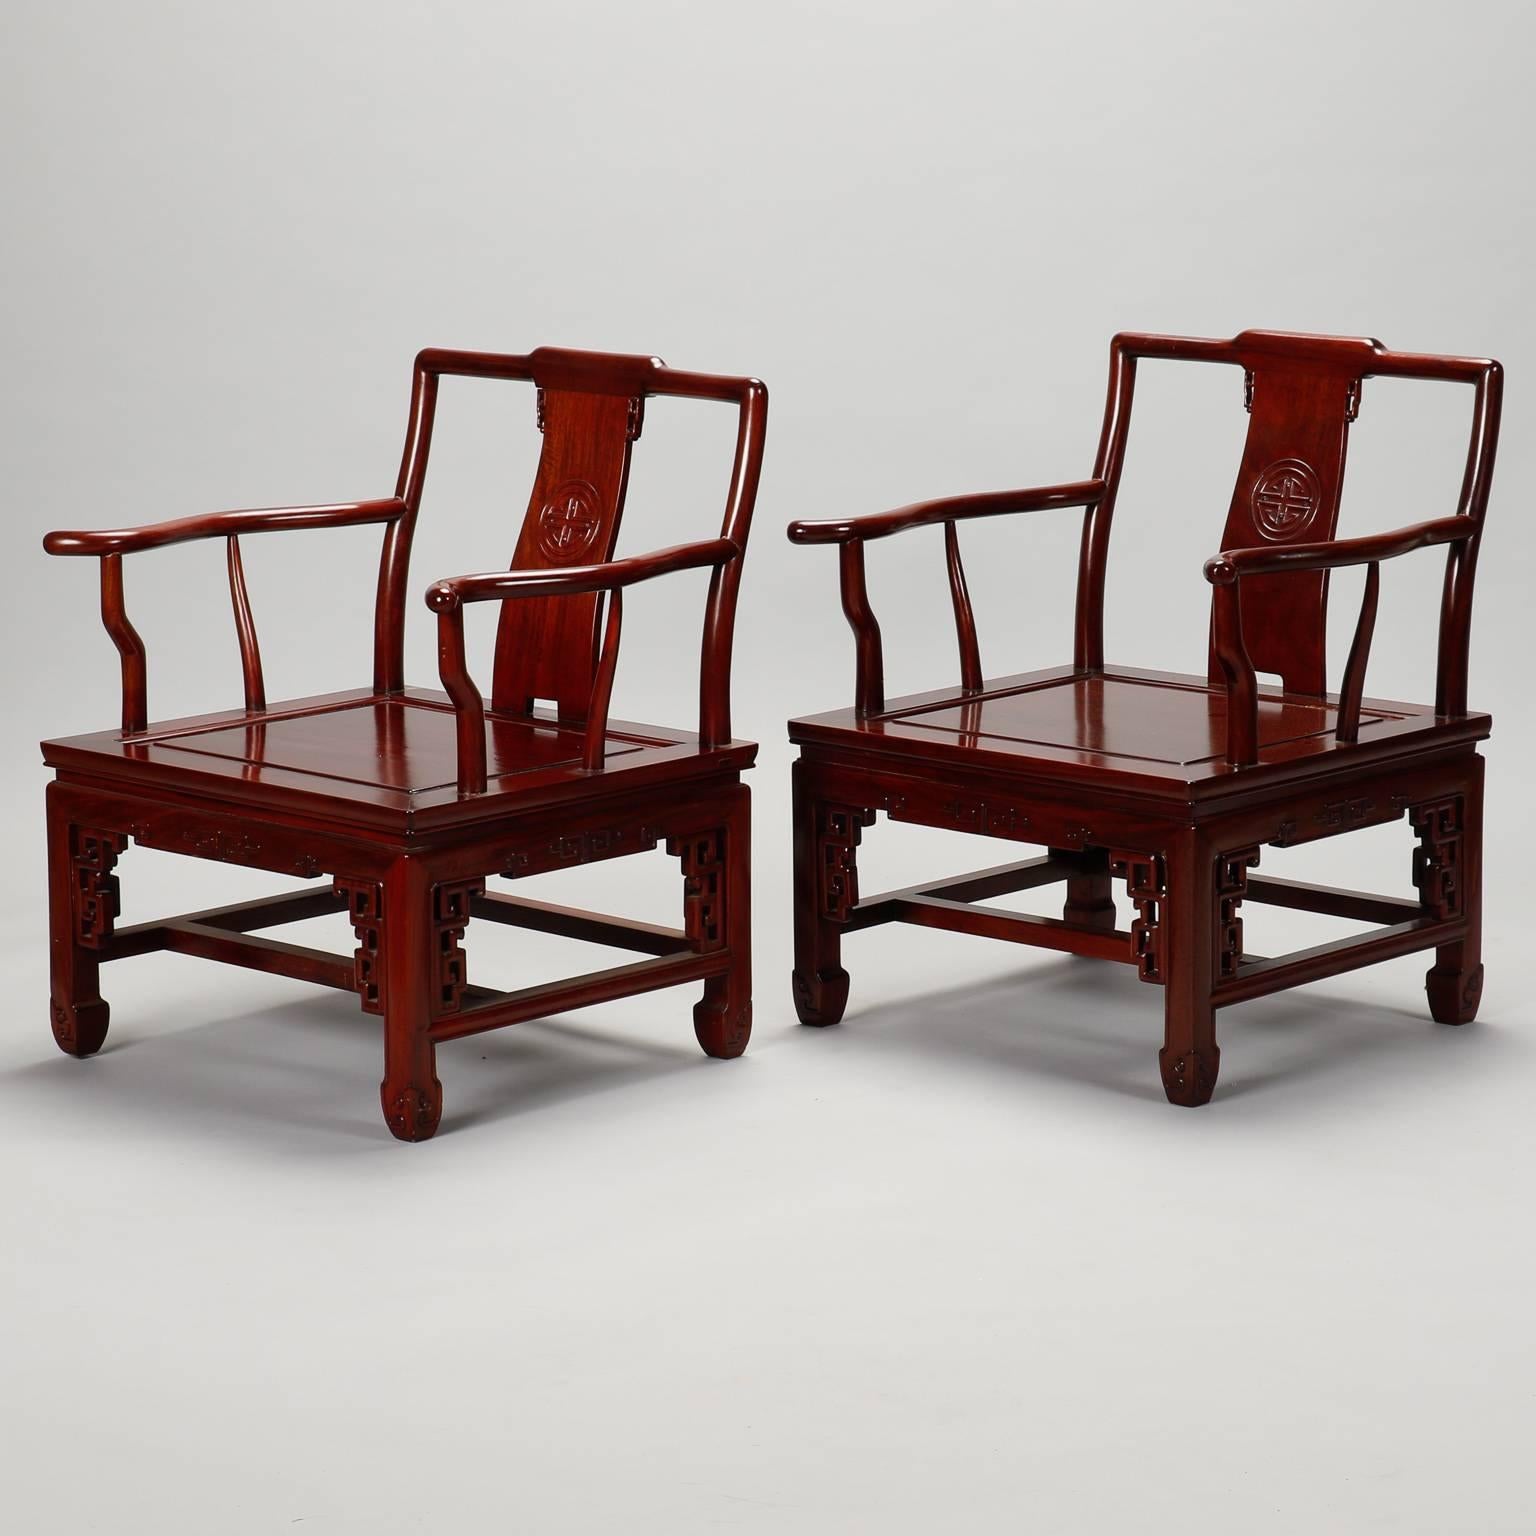 Pair of carved wood armchairs from China. Deep red stained wood with carved details on the feet and backrests. Original satin brocade cushions available for pattern, but interior filling has disintegrated. Seats with no cushions are 14.5